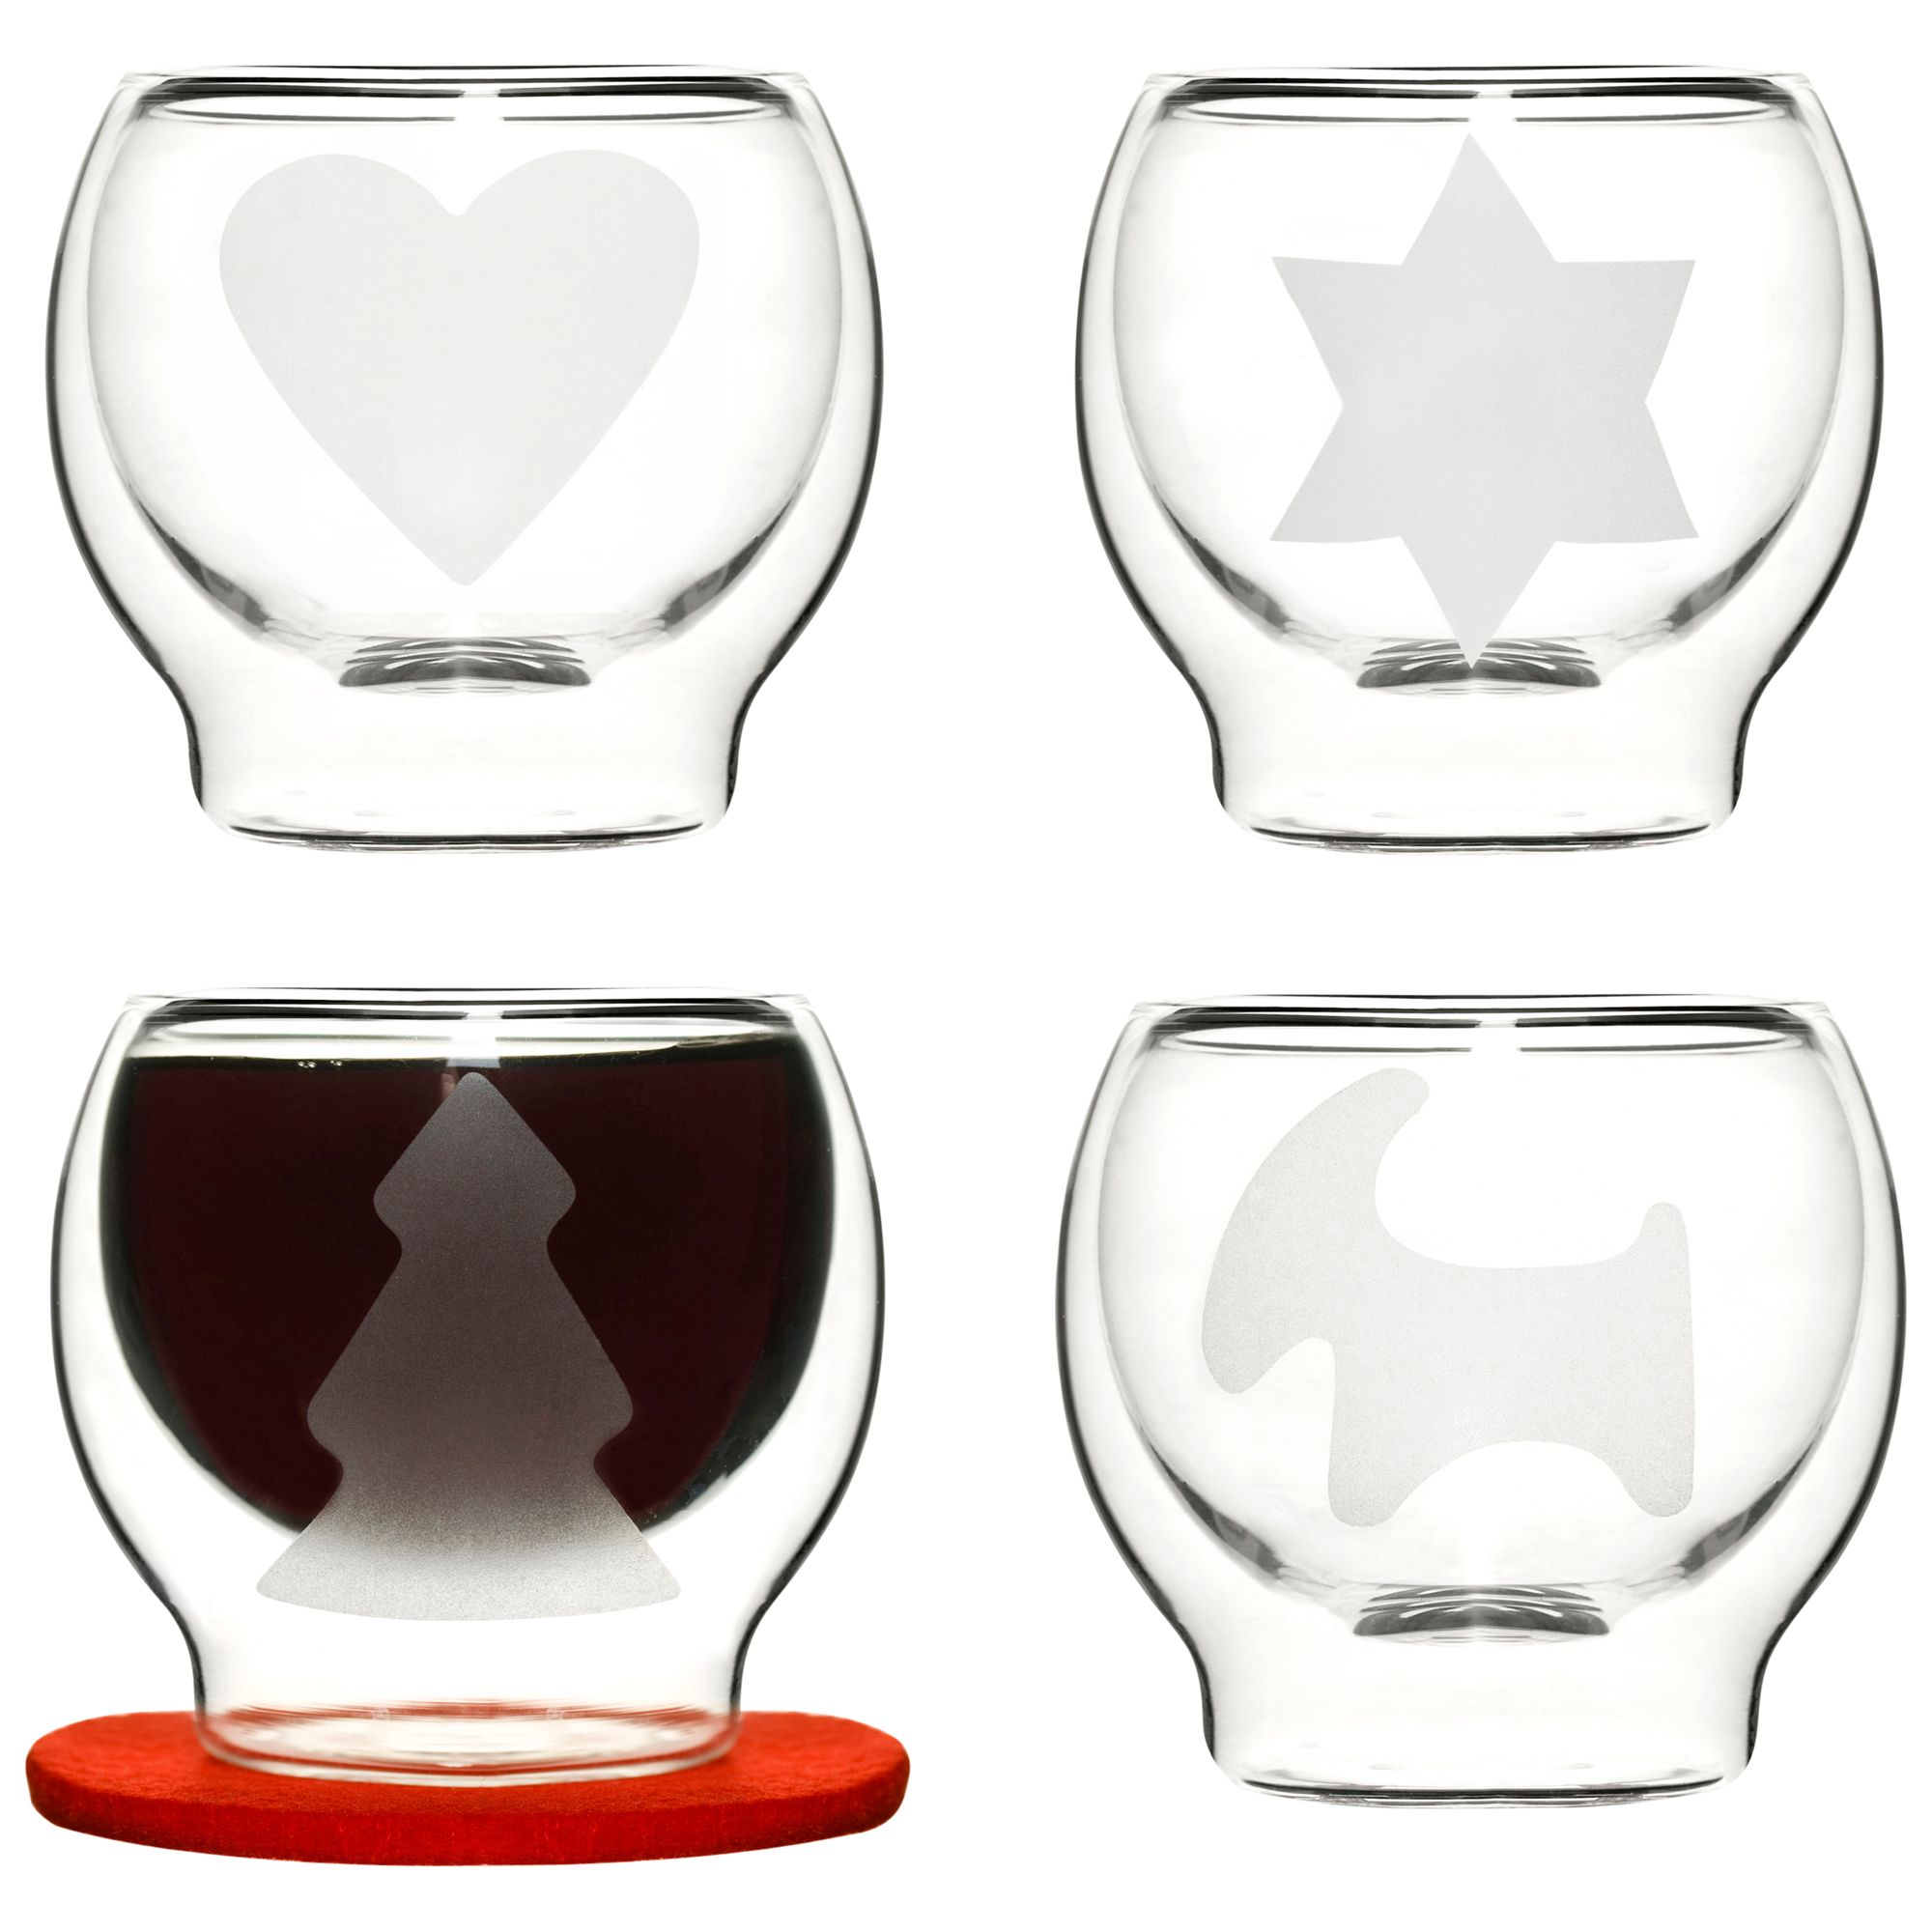 Buy Set Of 4 Mulled Wine Glasses from the Next UK online shop